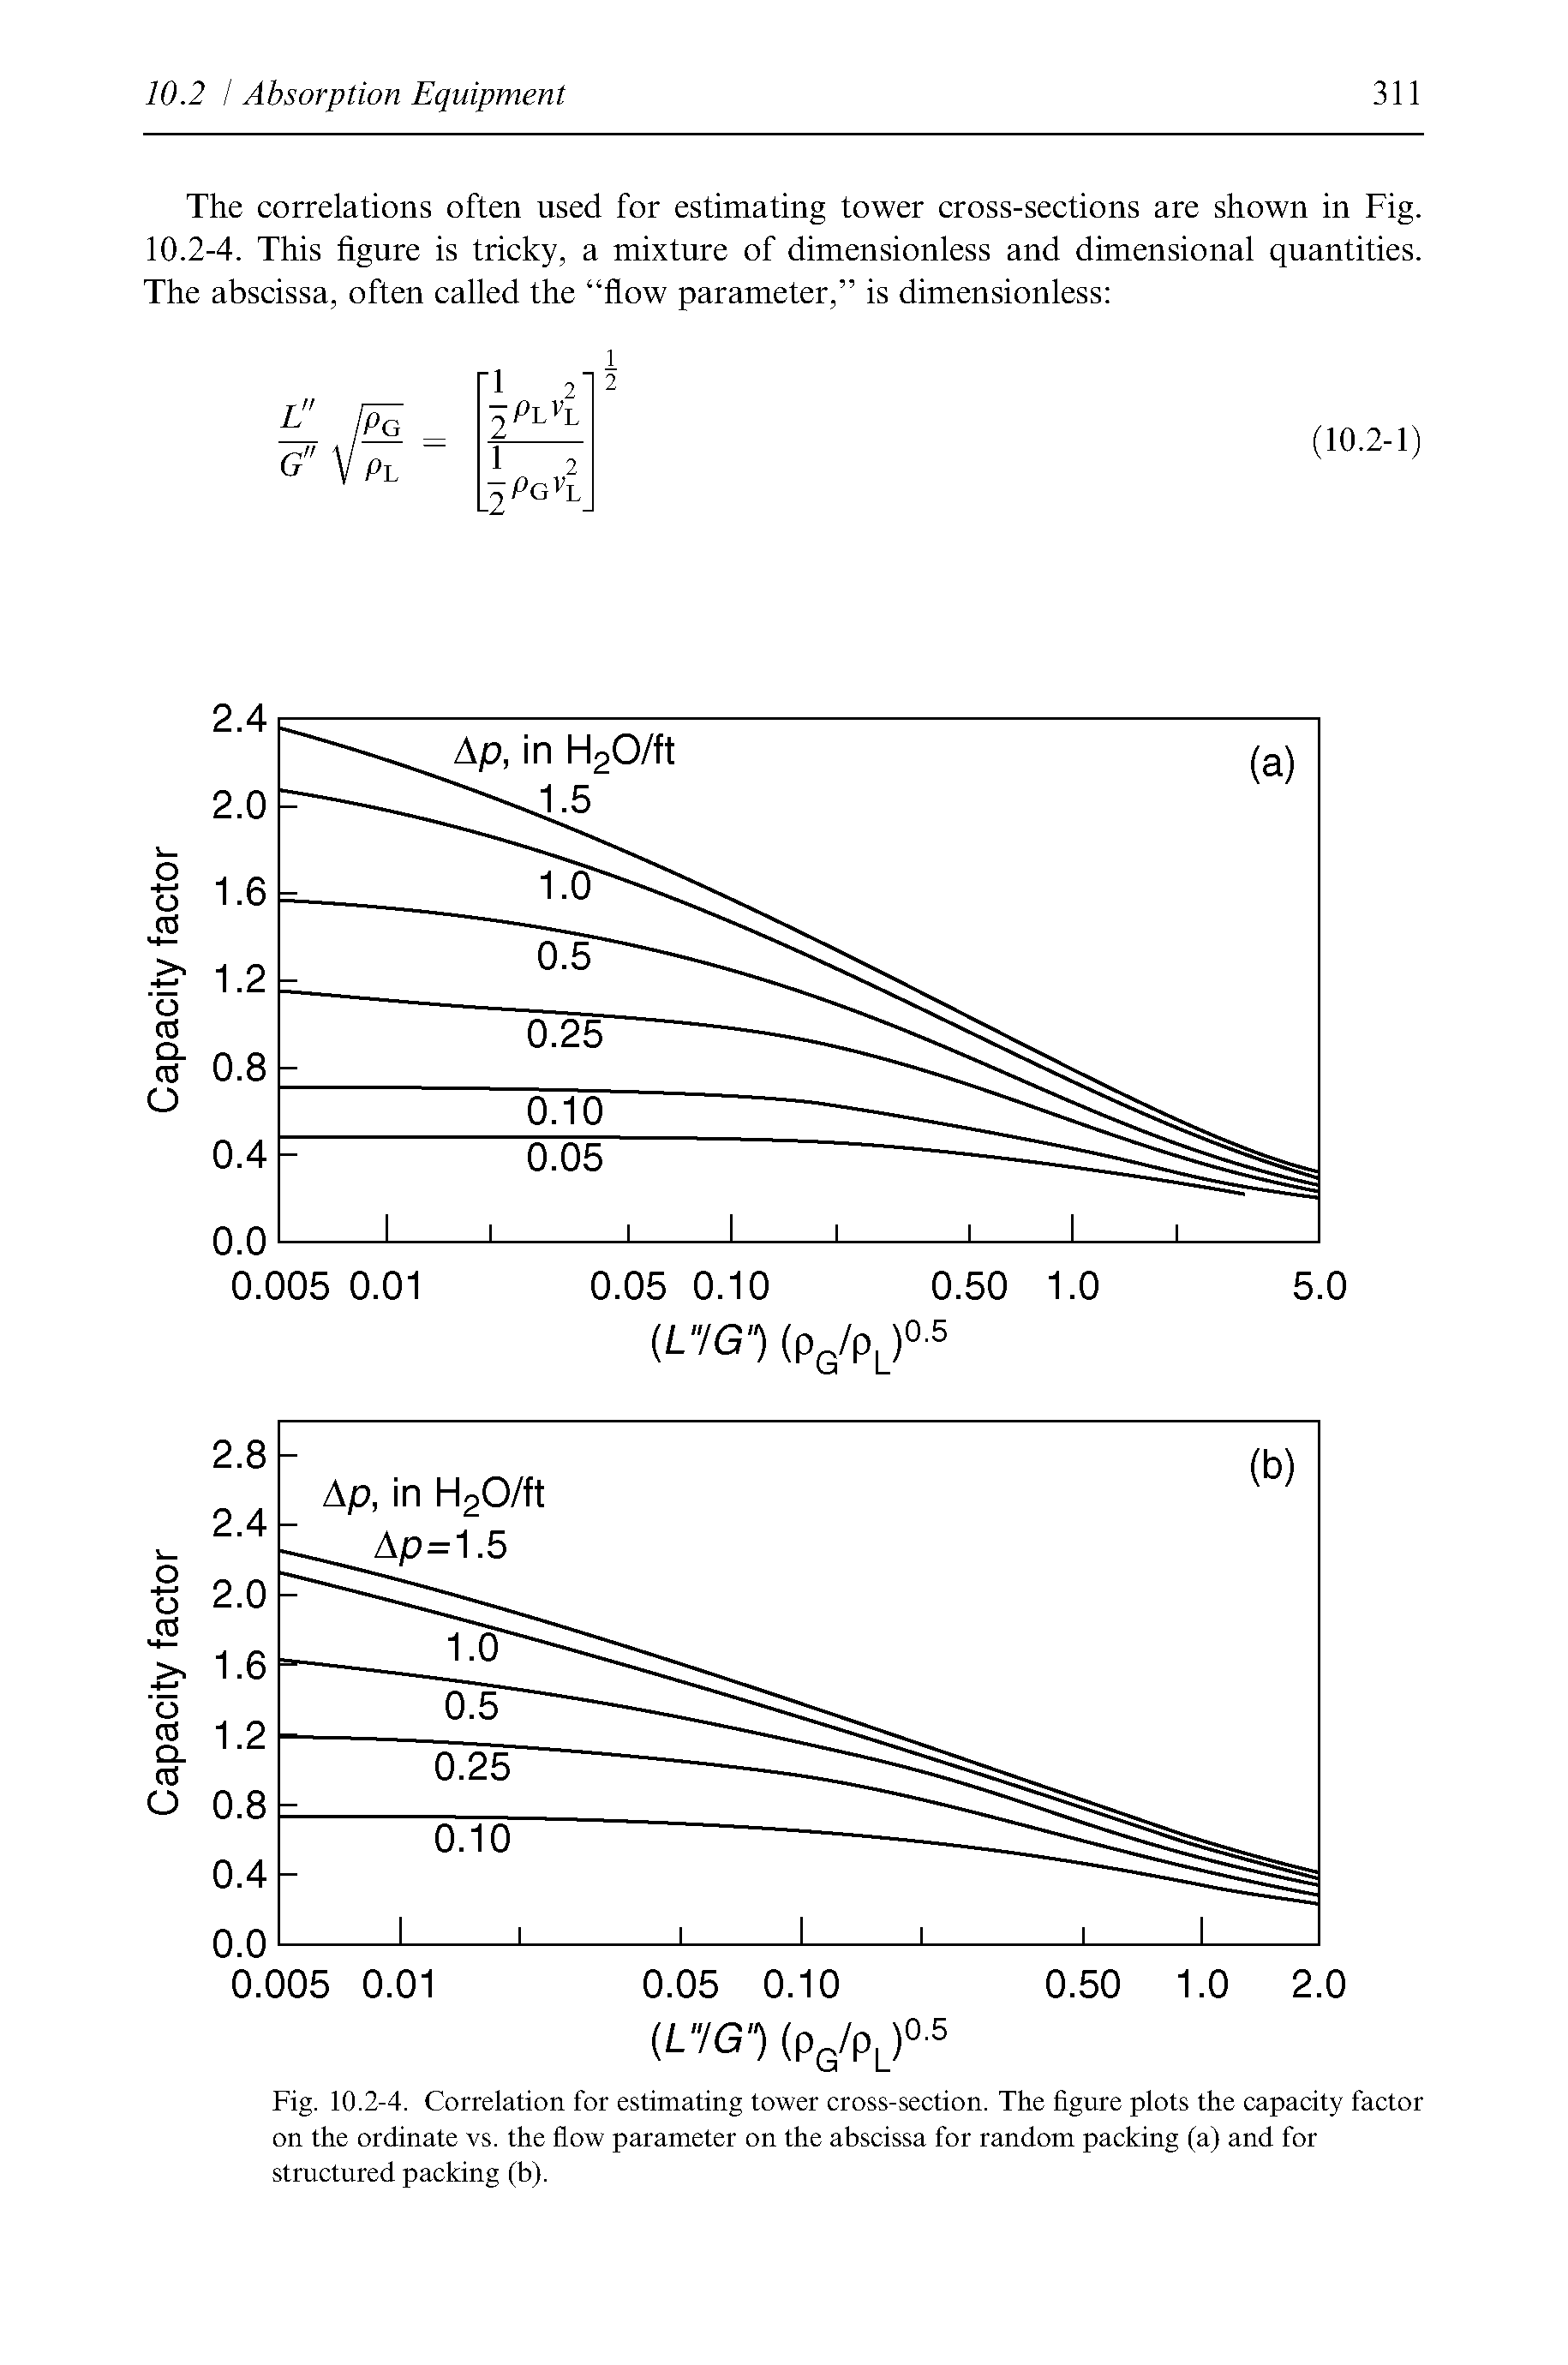 Fig. 10.2-4. Correlation for estimating tower cross-section. The figure plots the capacity factor on the ordinate vs. the flow parameter on the abscissa for random packing (a) and for structured packing (b).